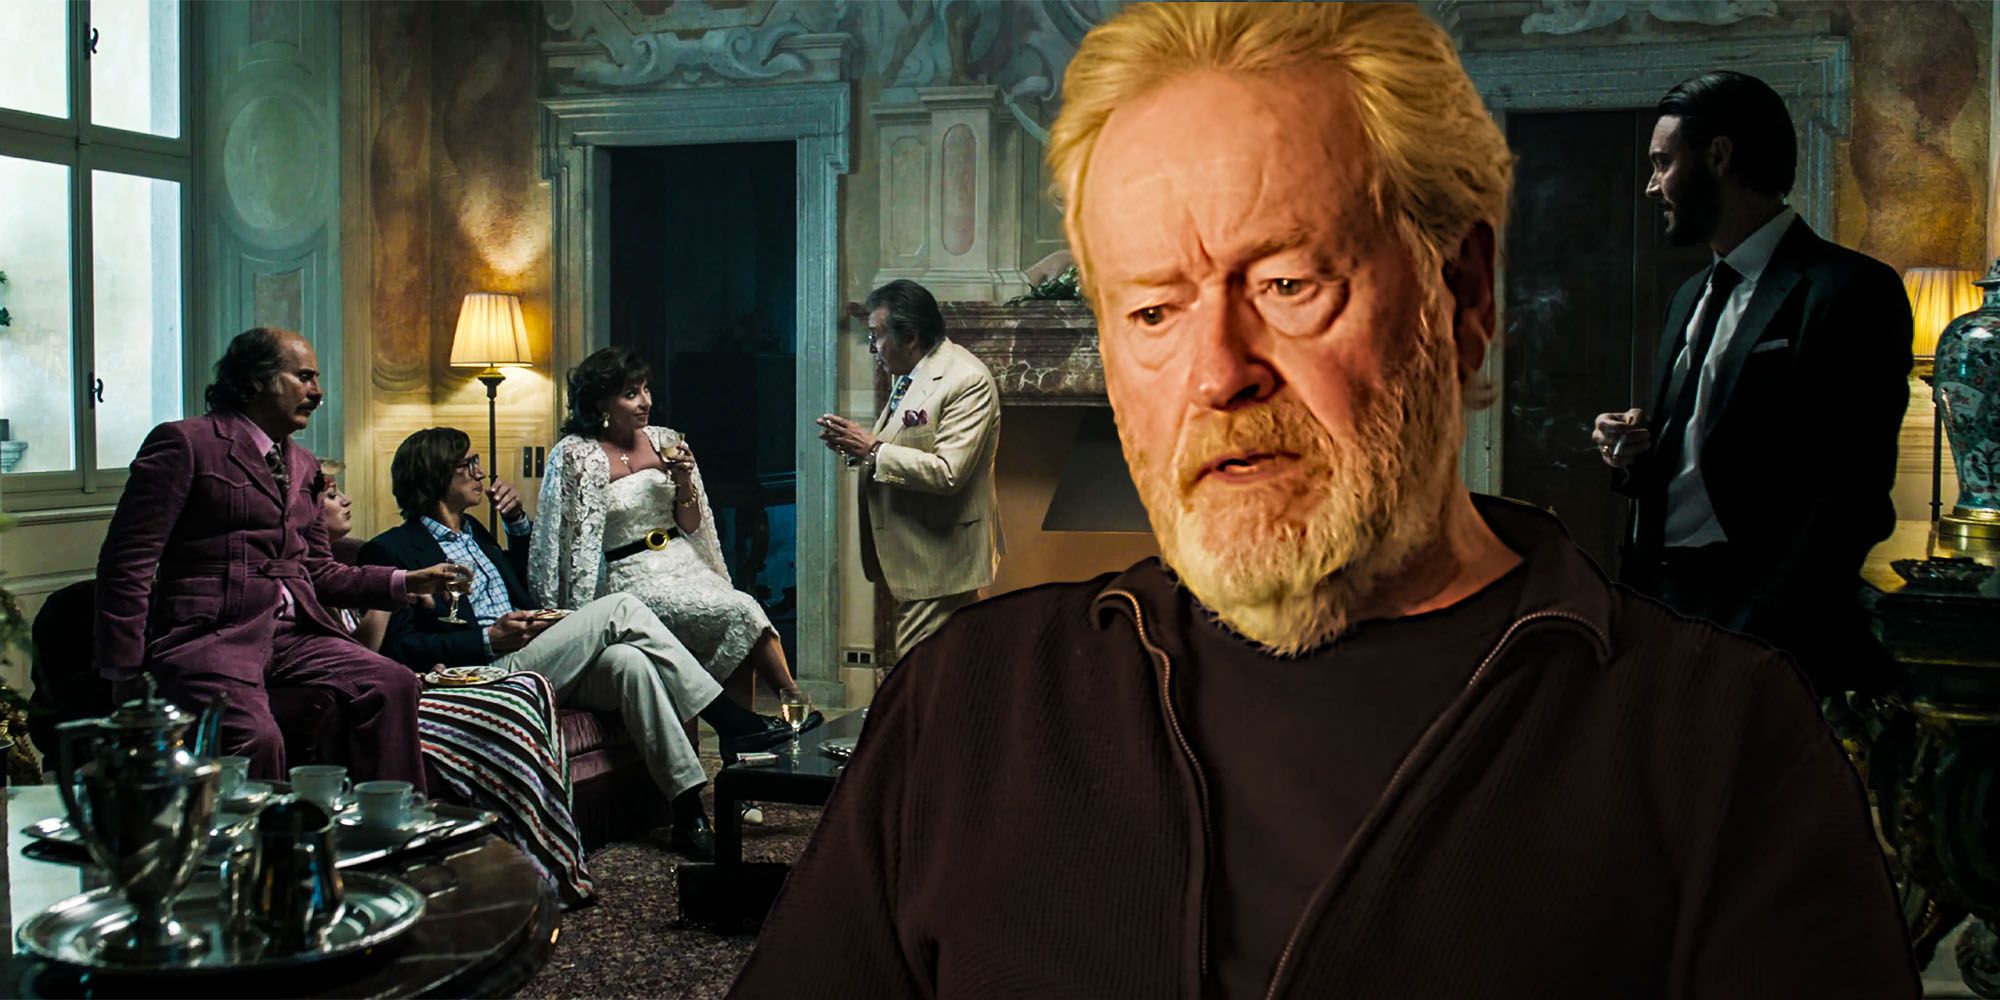 How Gucci's Rotten Tomatoes Reviews Compare to Other Ridley Scott Movies